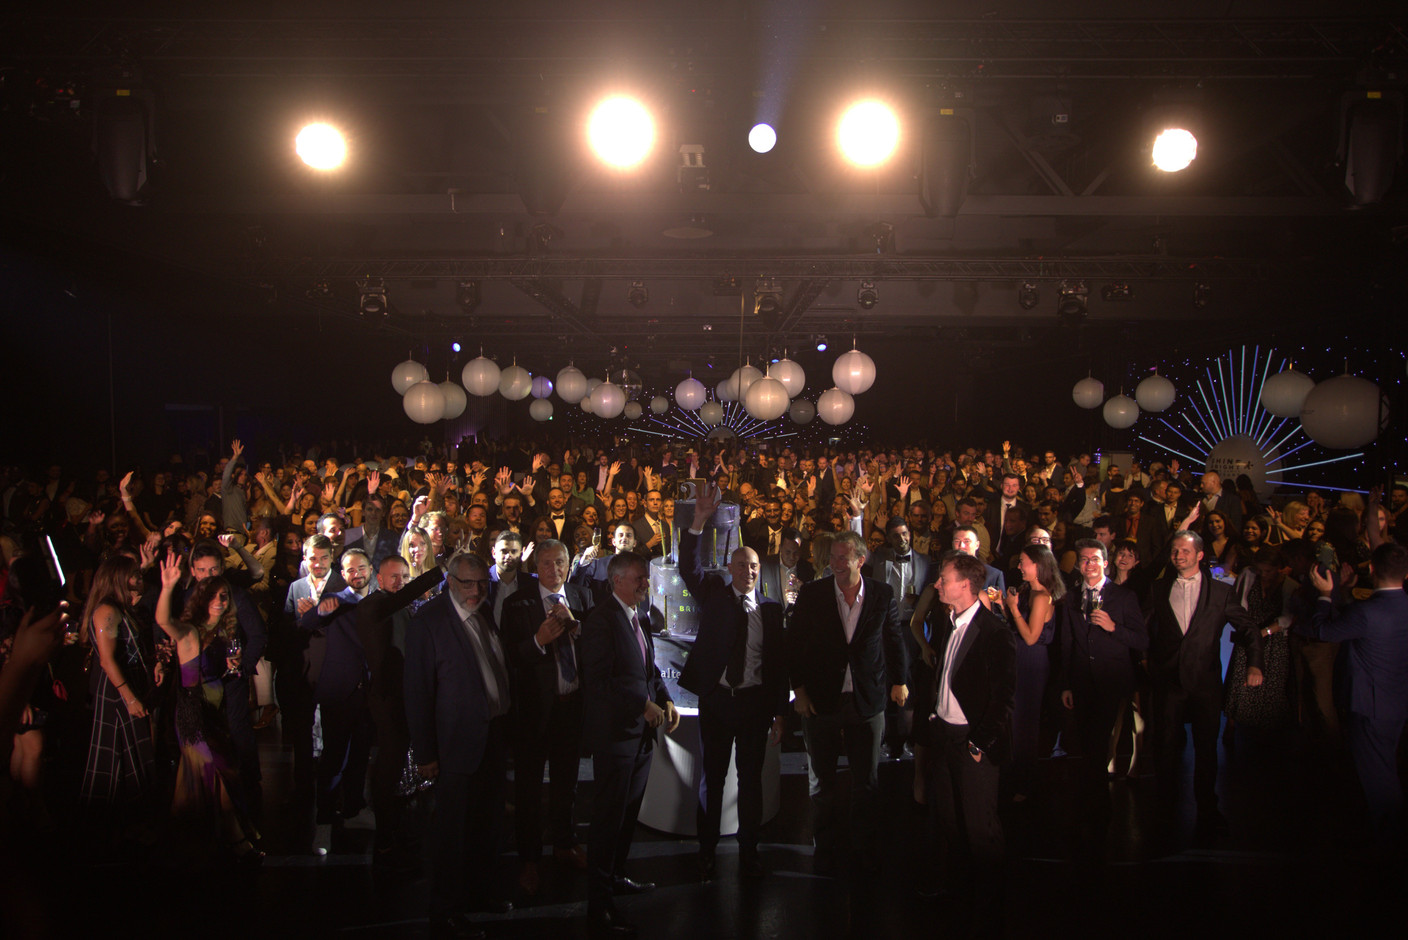 Over 800 guests joined the celebrations for Alter Domus’ 20th anniversary, which took place at Luxexpo on 29 September. Photo: Alter Domus